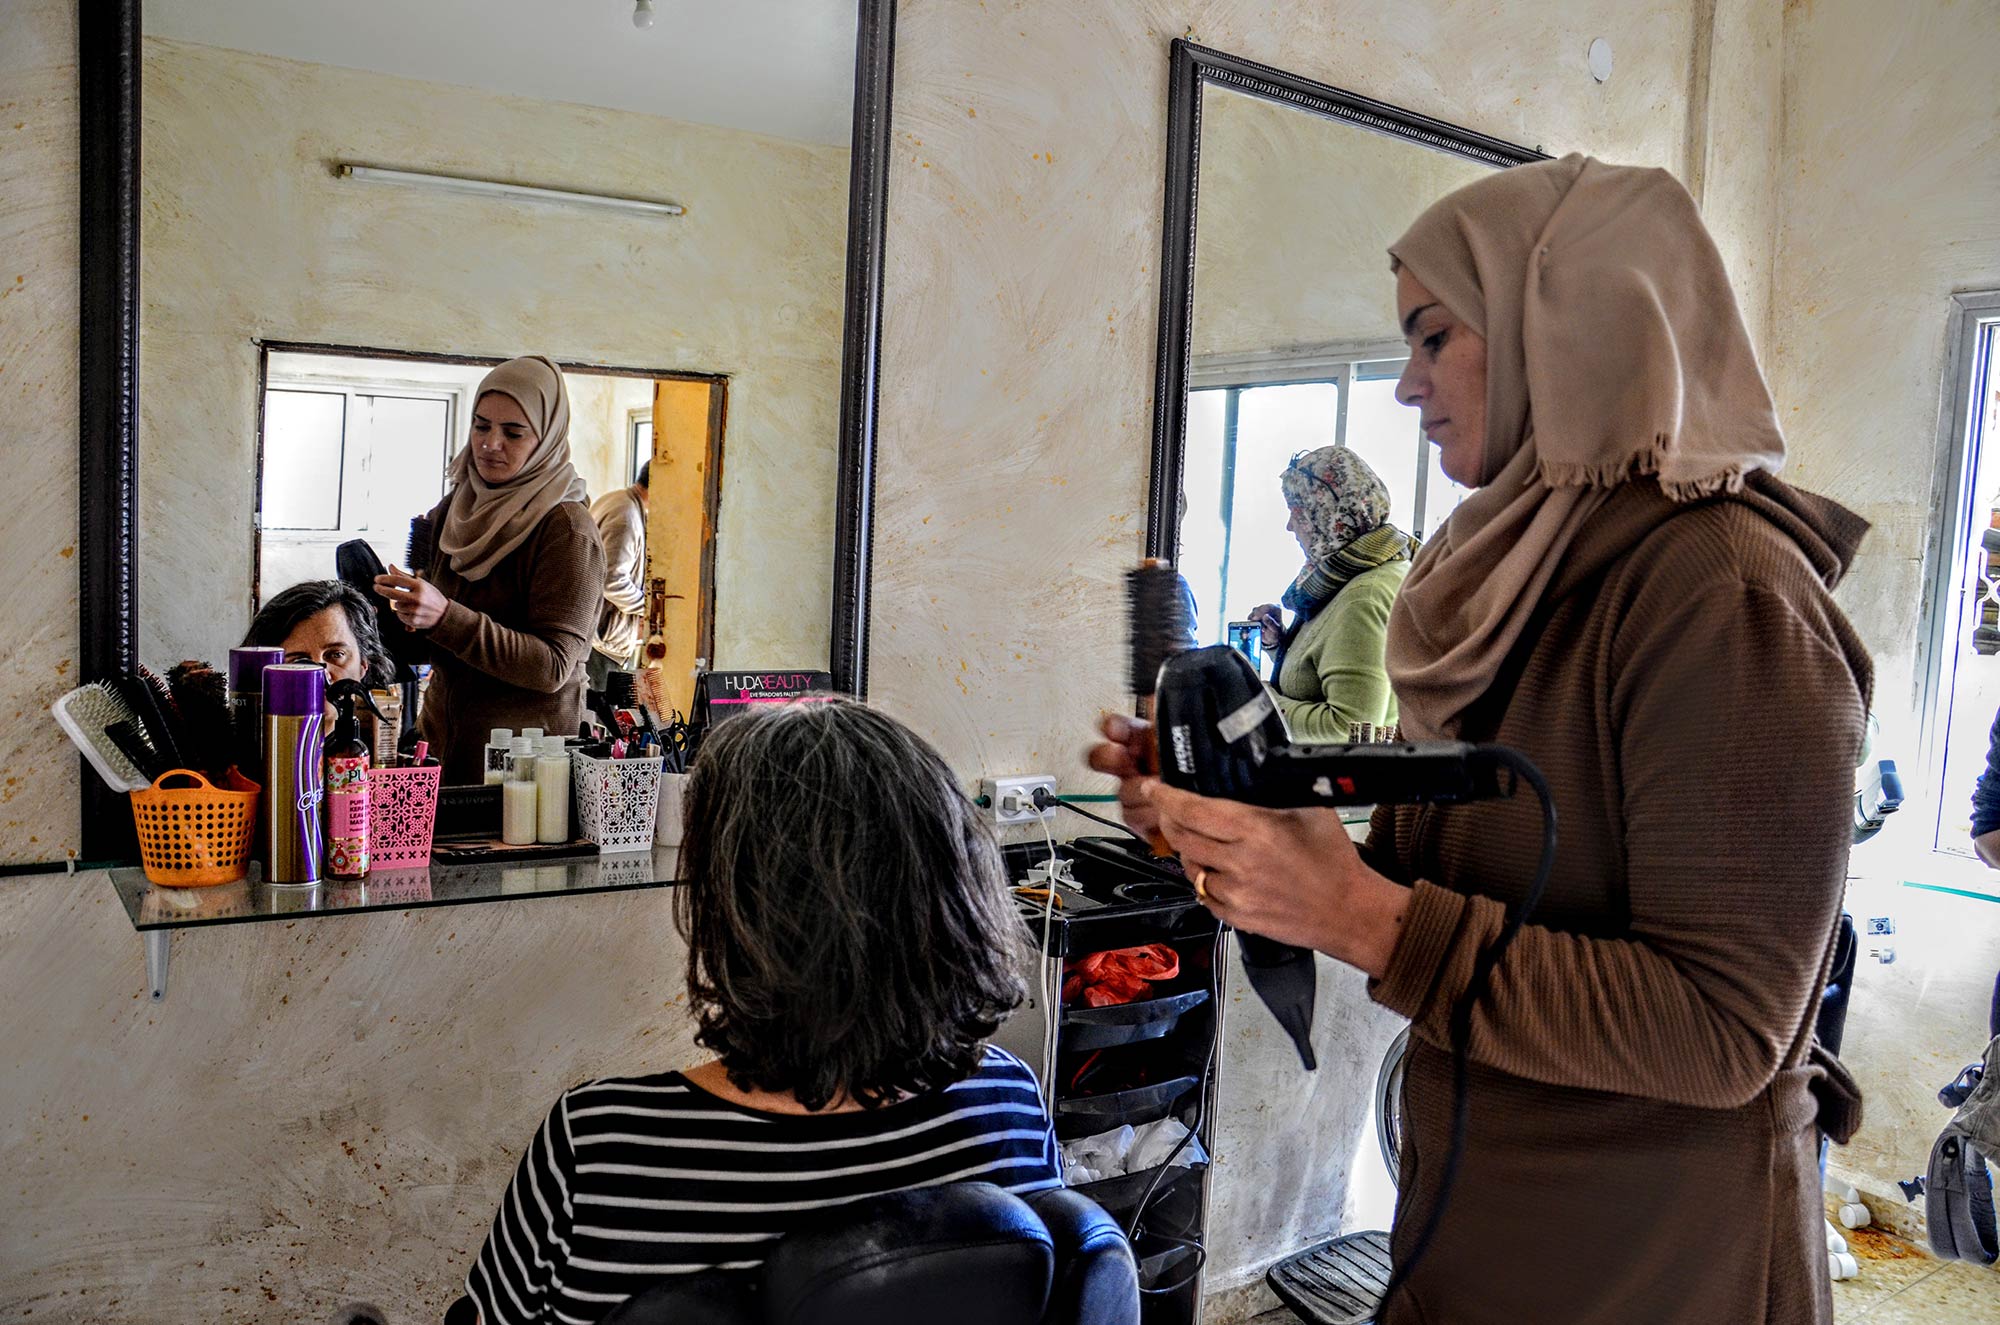 Abeer is getting down to work in her new, well-equipped salon.